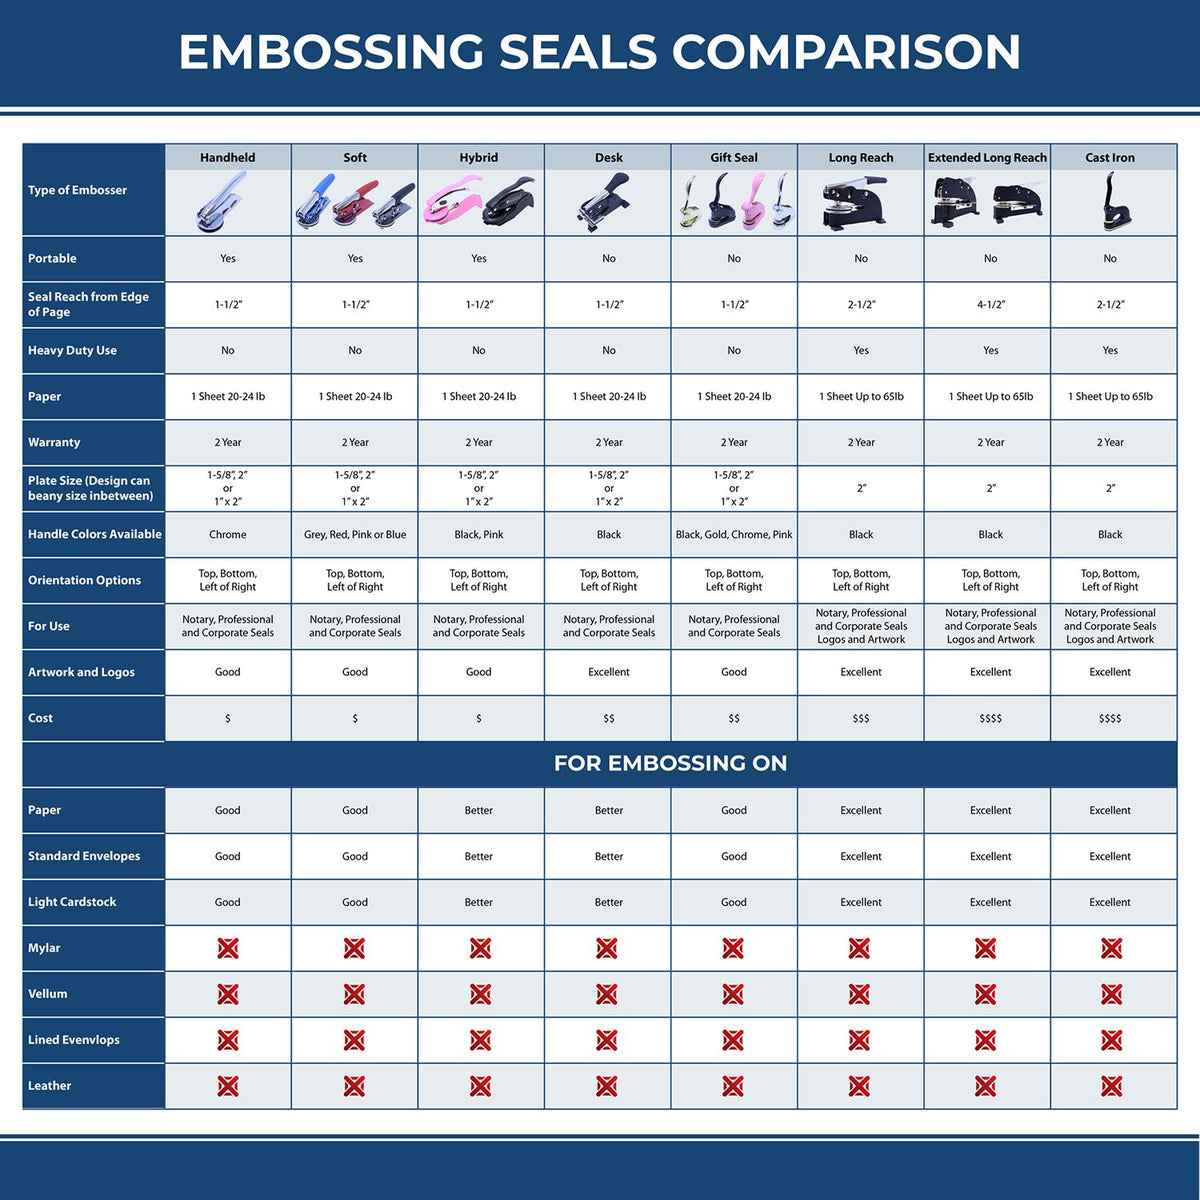 A comparison chart for the different types of mount models available for the Heavy Duty Cast Iron Michigan Land Surveyor Seal Embosser.